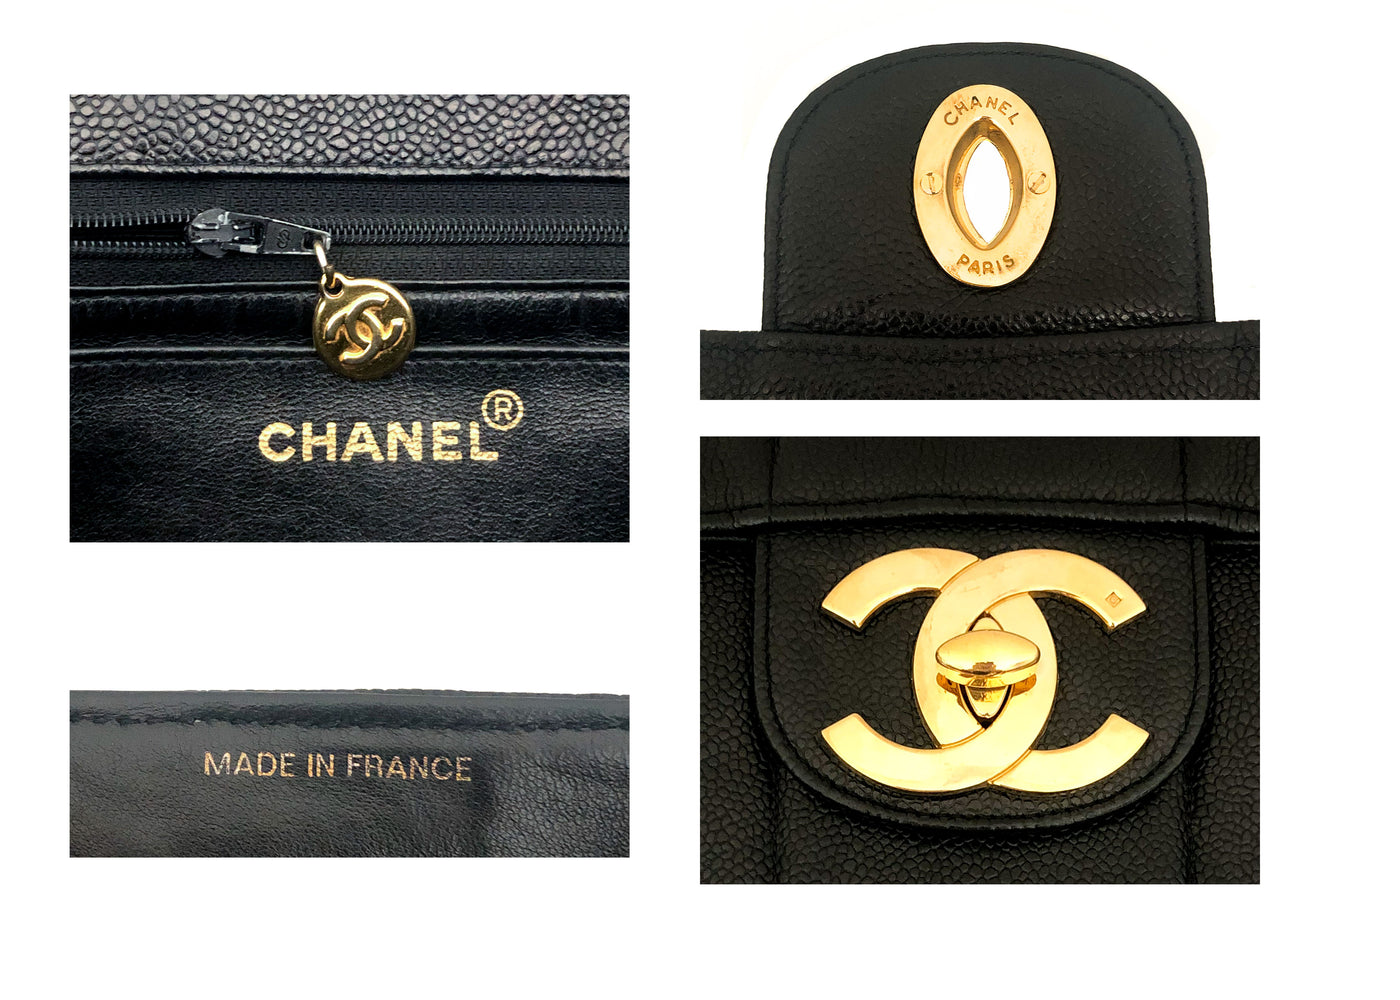 Chanel Vintage Rare Black Caviar Vertical Quilted Jumbo